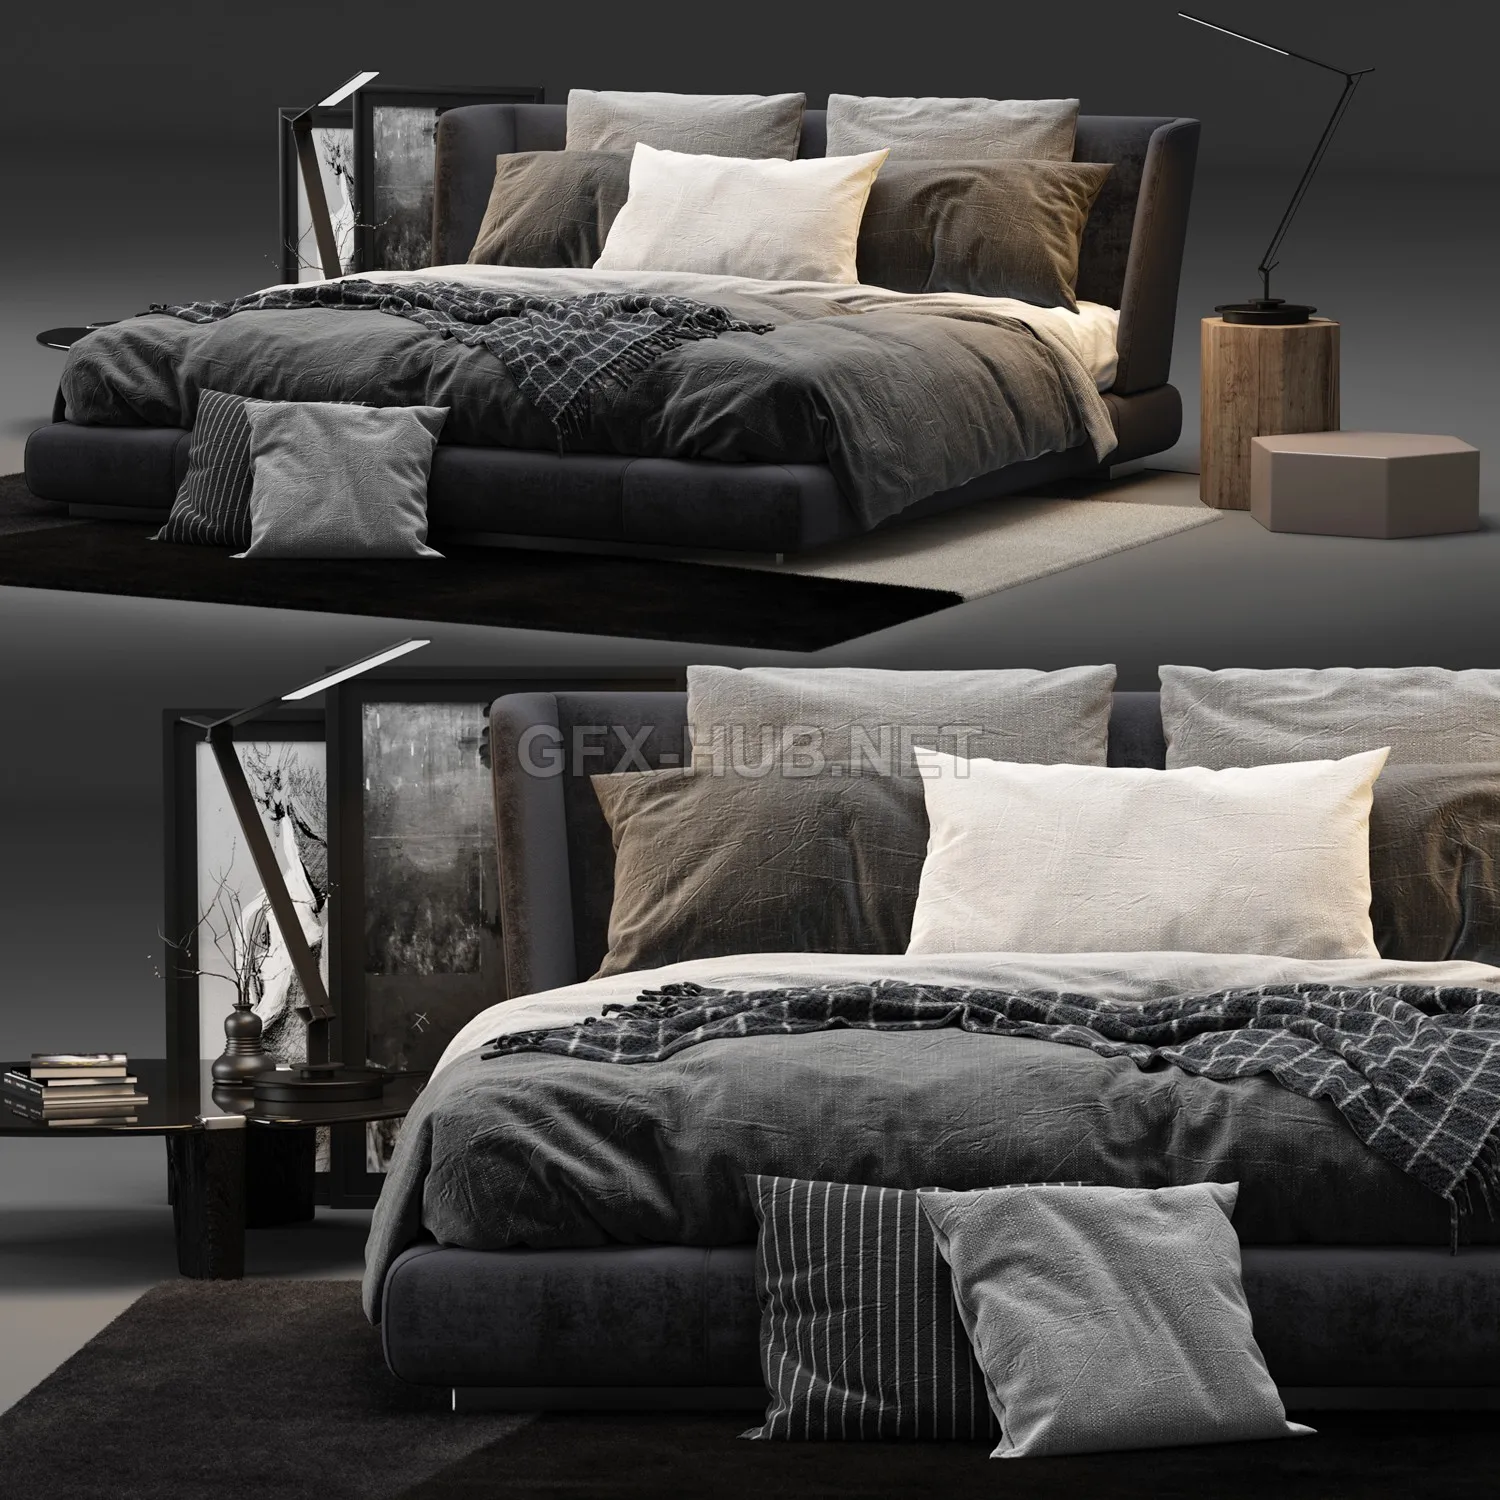 Creed Bed by Minotti (Vray) – 211499